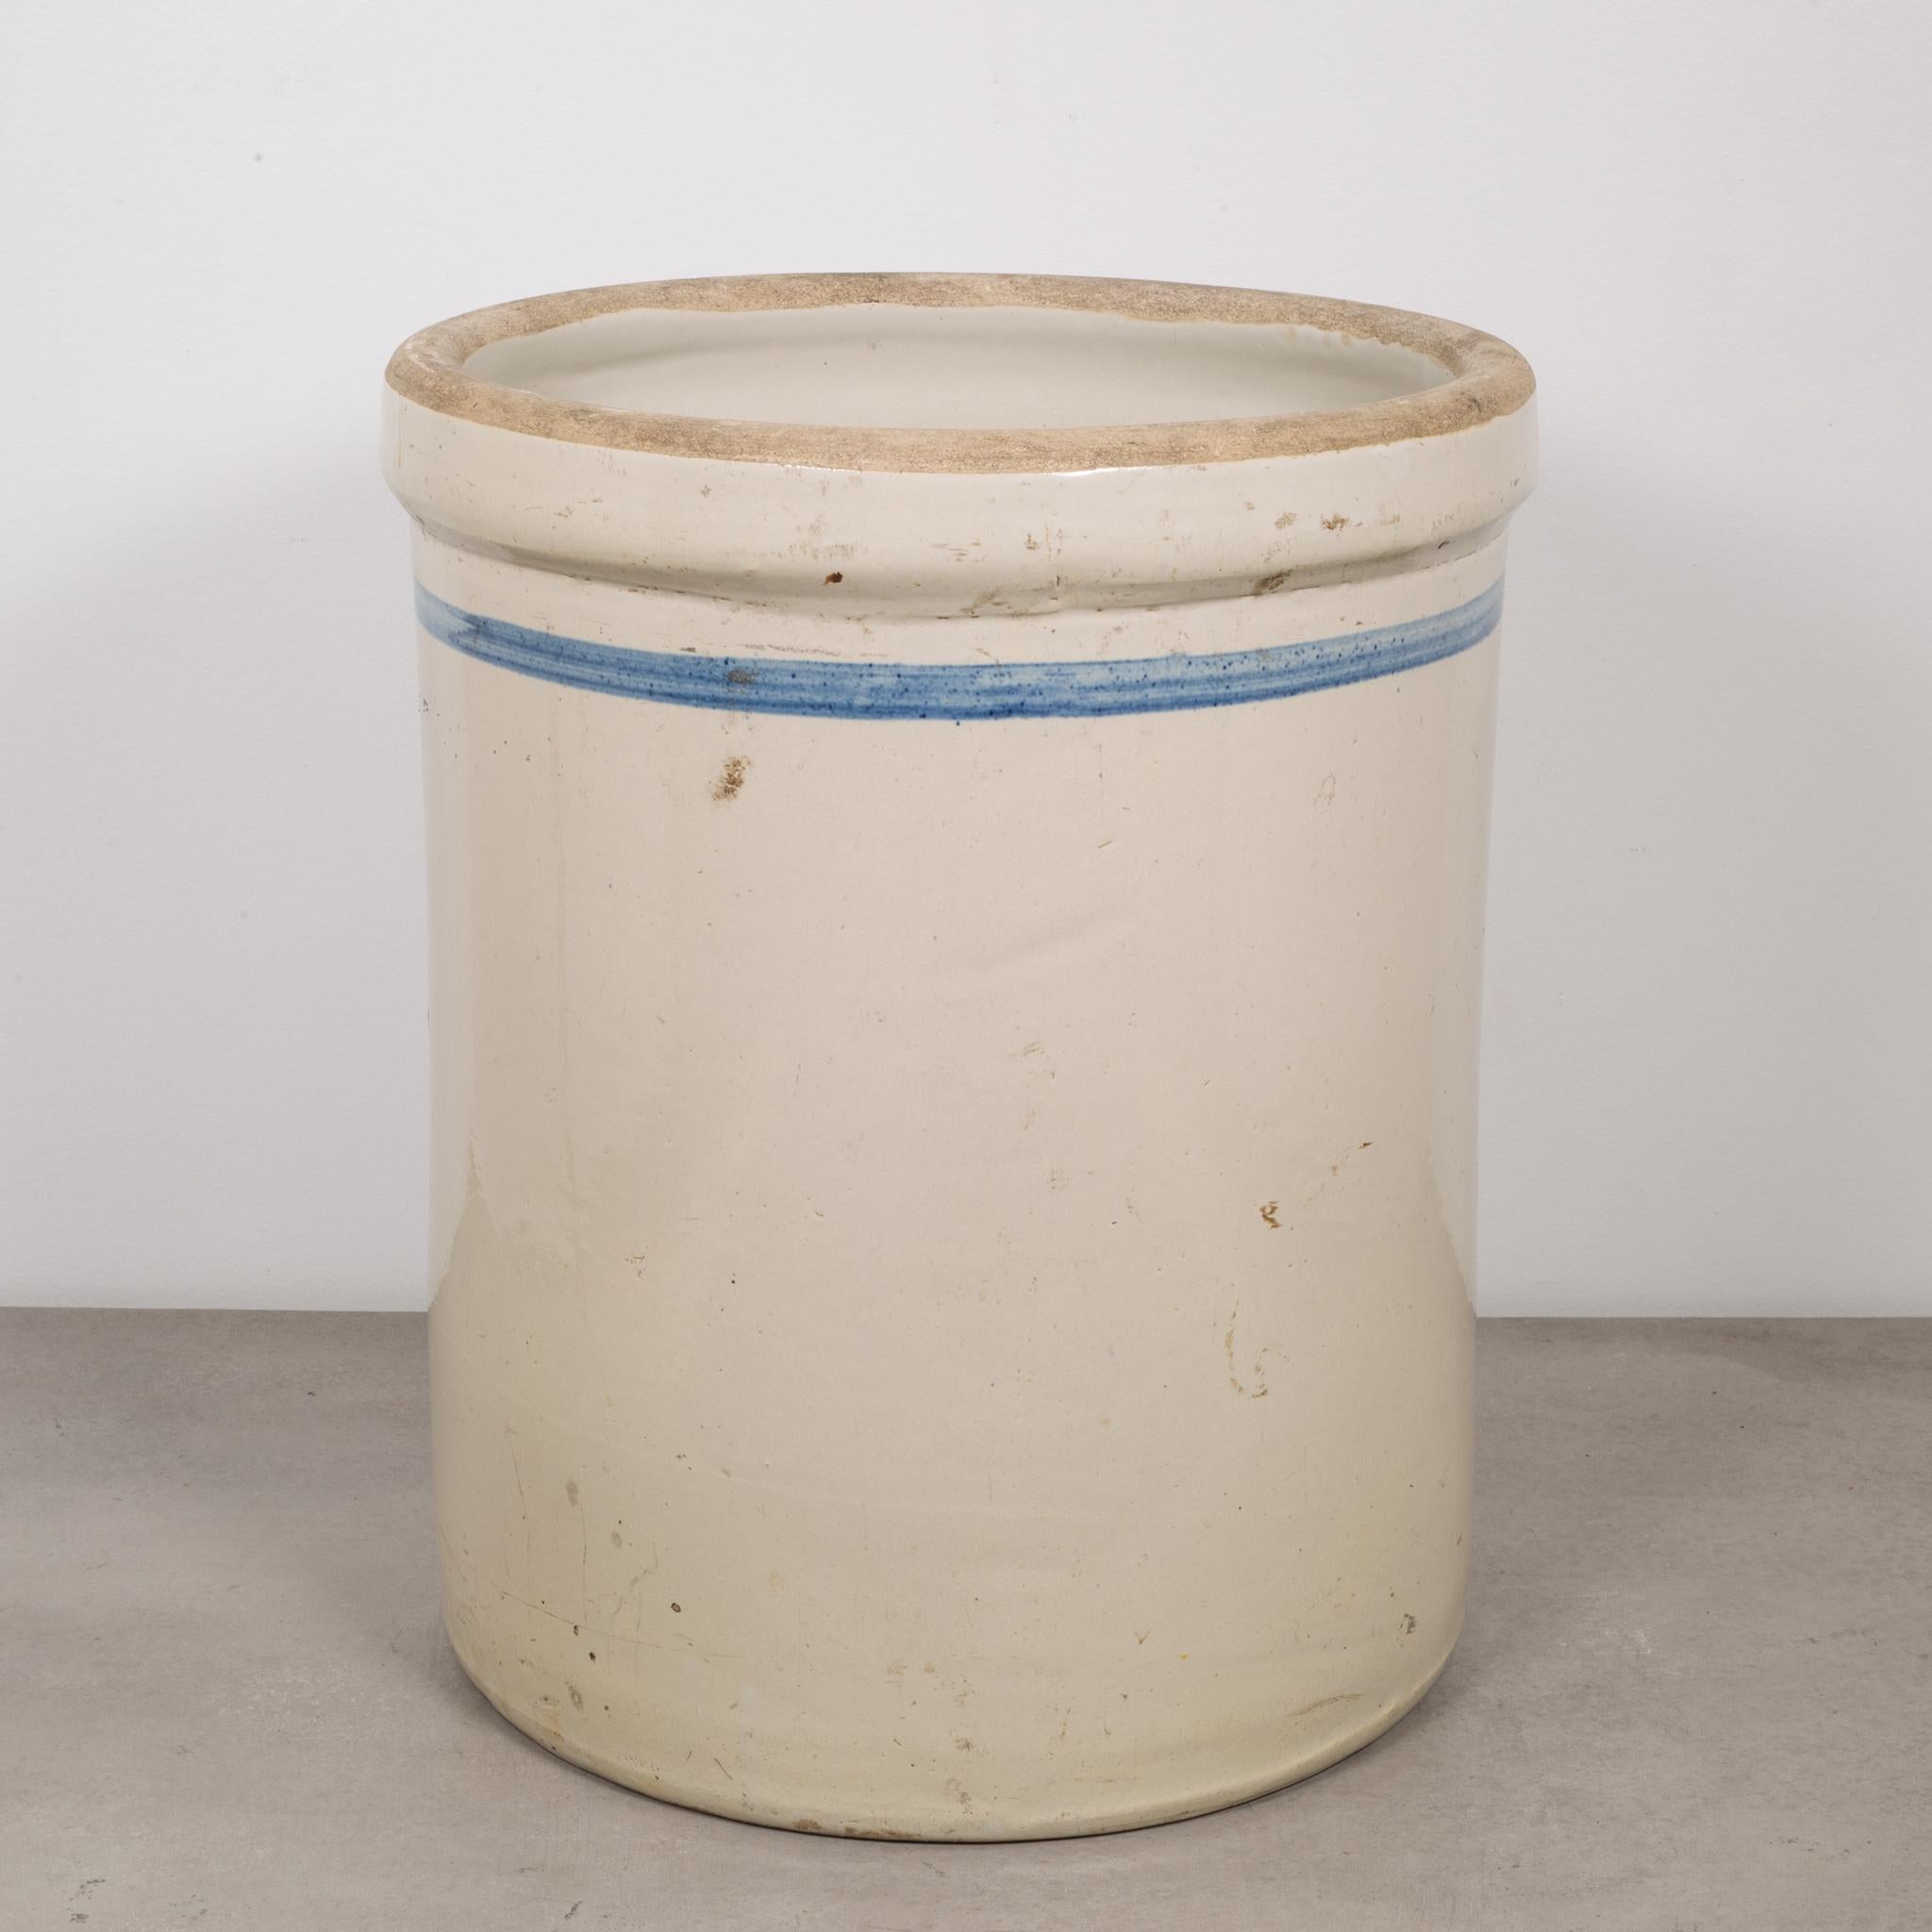 About

This is an original large stoneware 6 gallon crock. This piece has retained its original finish with minimal wear.

Creator: Unknown.
Date of manufacture circa 1910-1930
Materials and techniques: Stoneware ceramic.
Condition: Good.